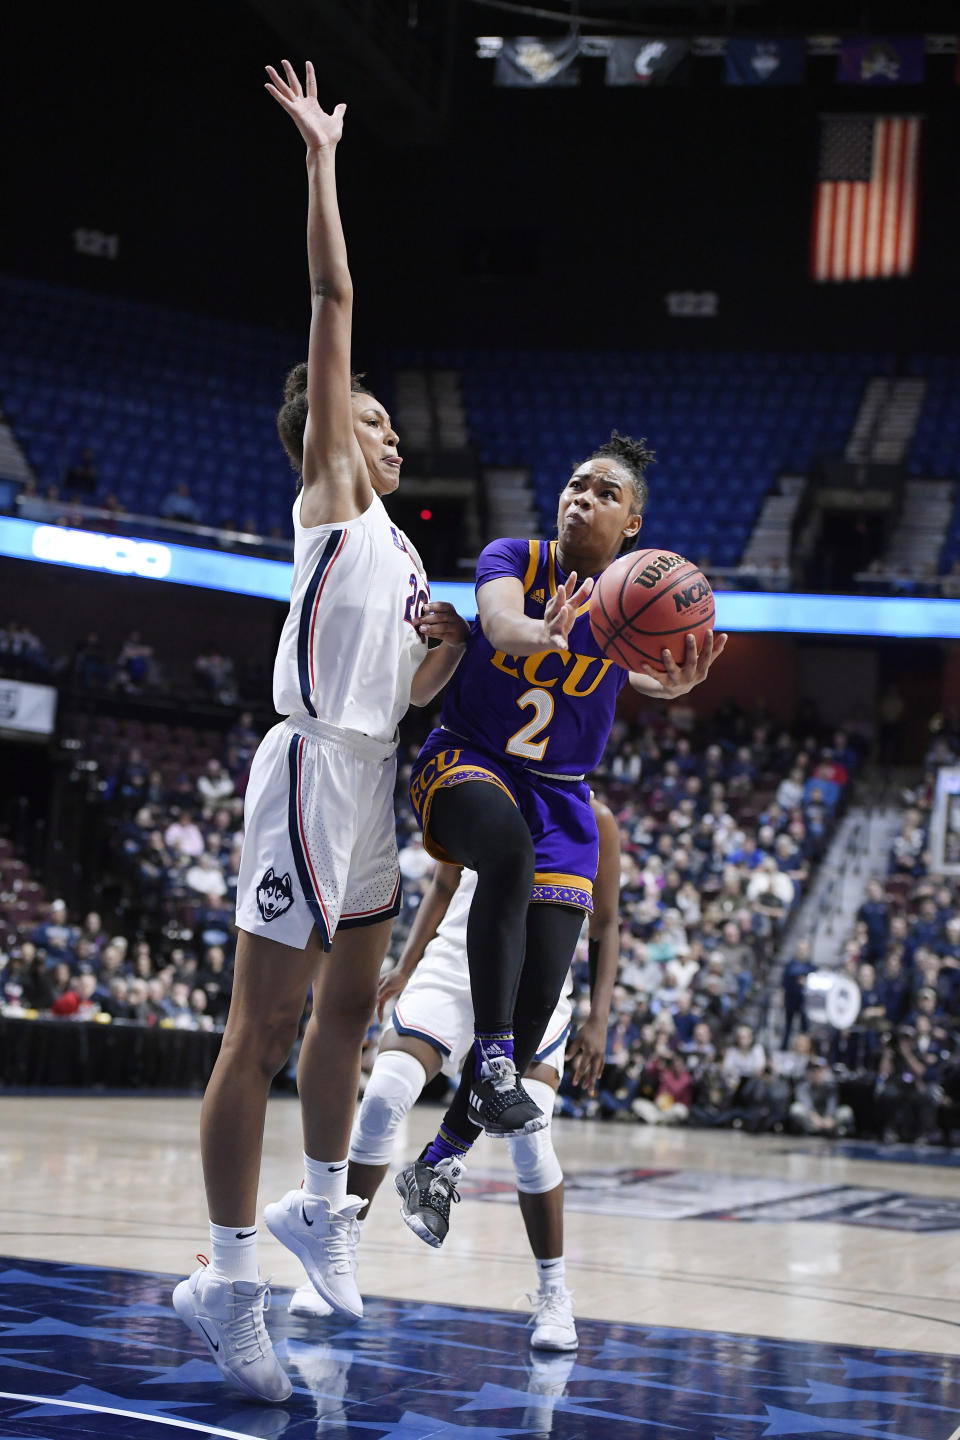 East Carolina's Lashonda Monk goes up to the basket as Connecticut's Olivia Nelson-Ododa defends during the second half of an NCAA college basketball game in the American Athletic Conference tournament quarterfinals, Saturday, March 9, 2019, at Mohegan Sun Arena in Uncasville, Conn. (AP Photo/Jessica Hill)